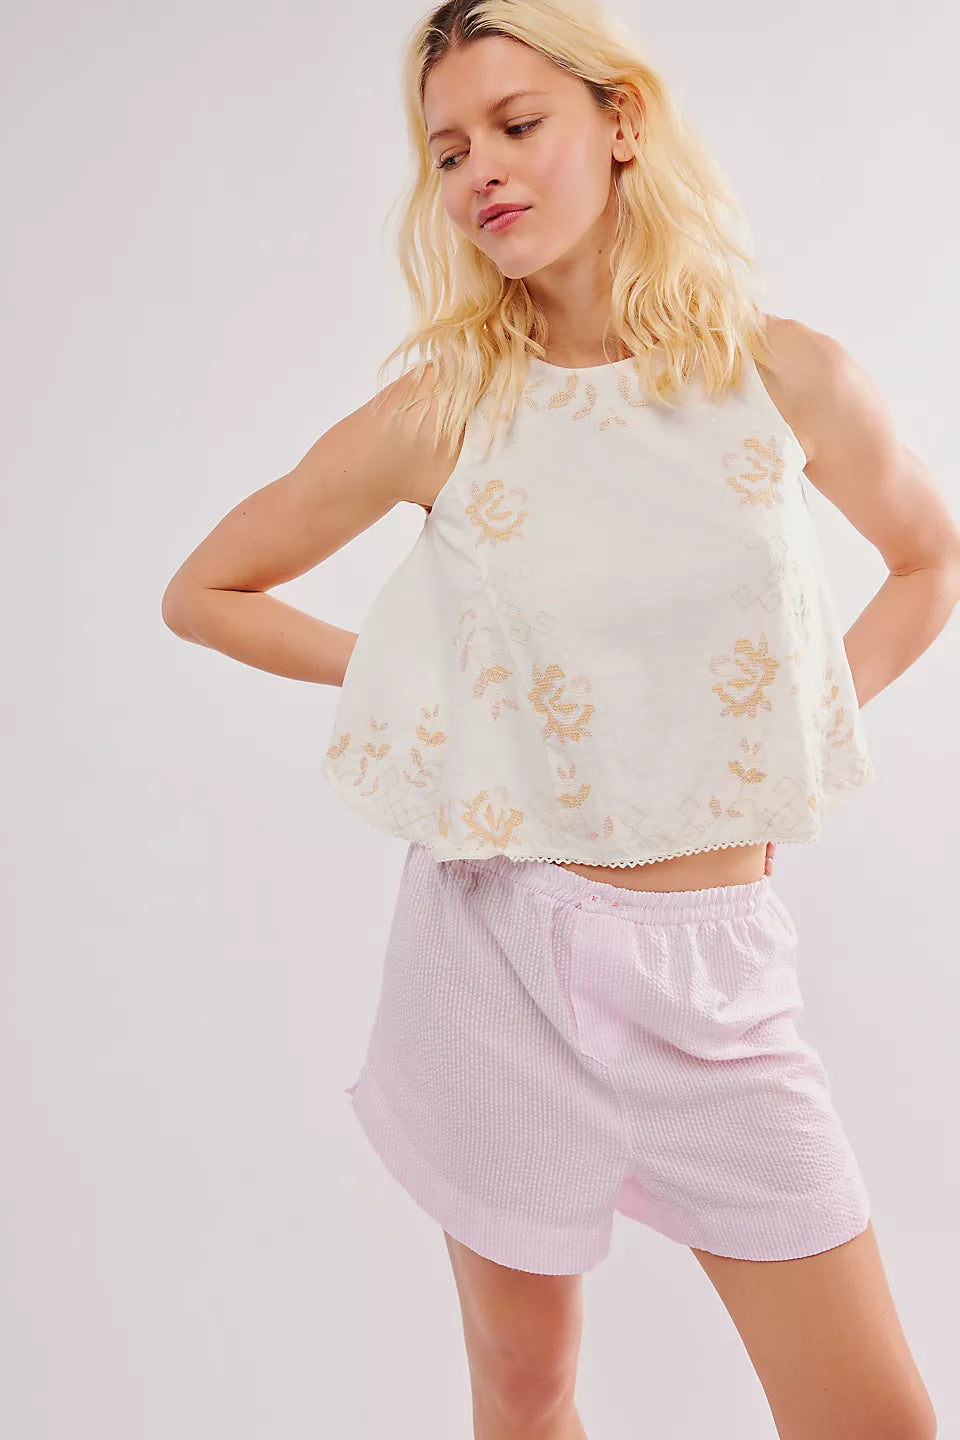 Free People Fun And Flirty Embroidered Top - Ivory Combo - Sun Diego Boardshop